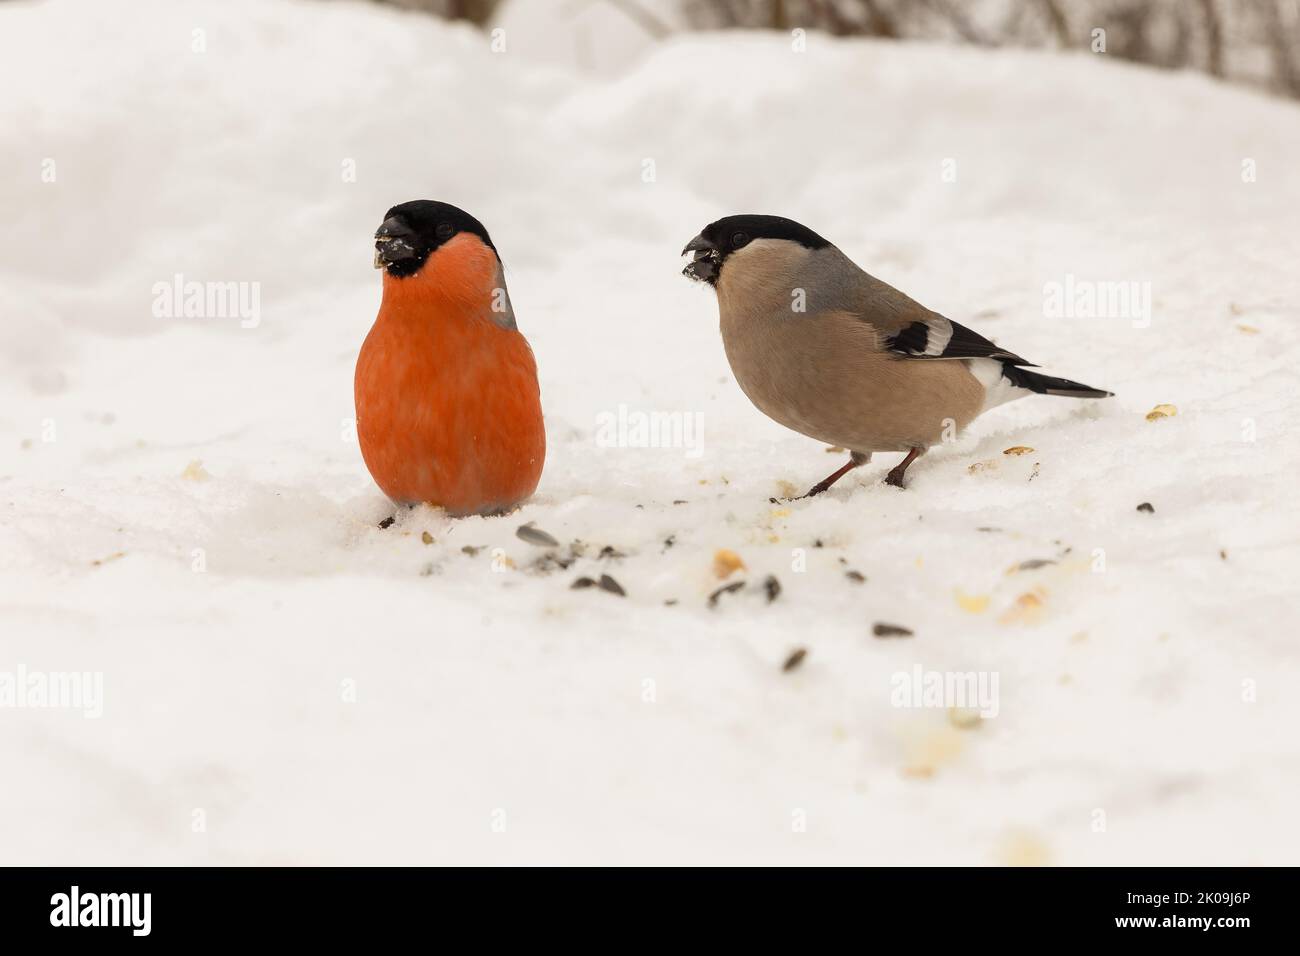 Eurasian bullfinch. Male and female. birds peck seeds on the snow in winter. Stock Photo